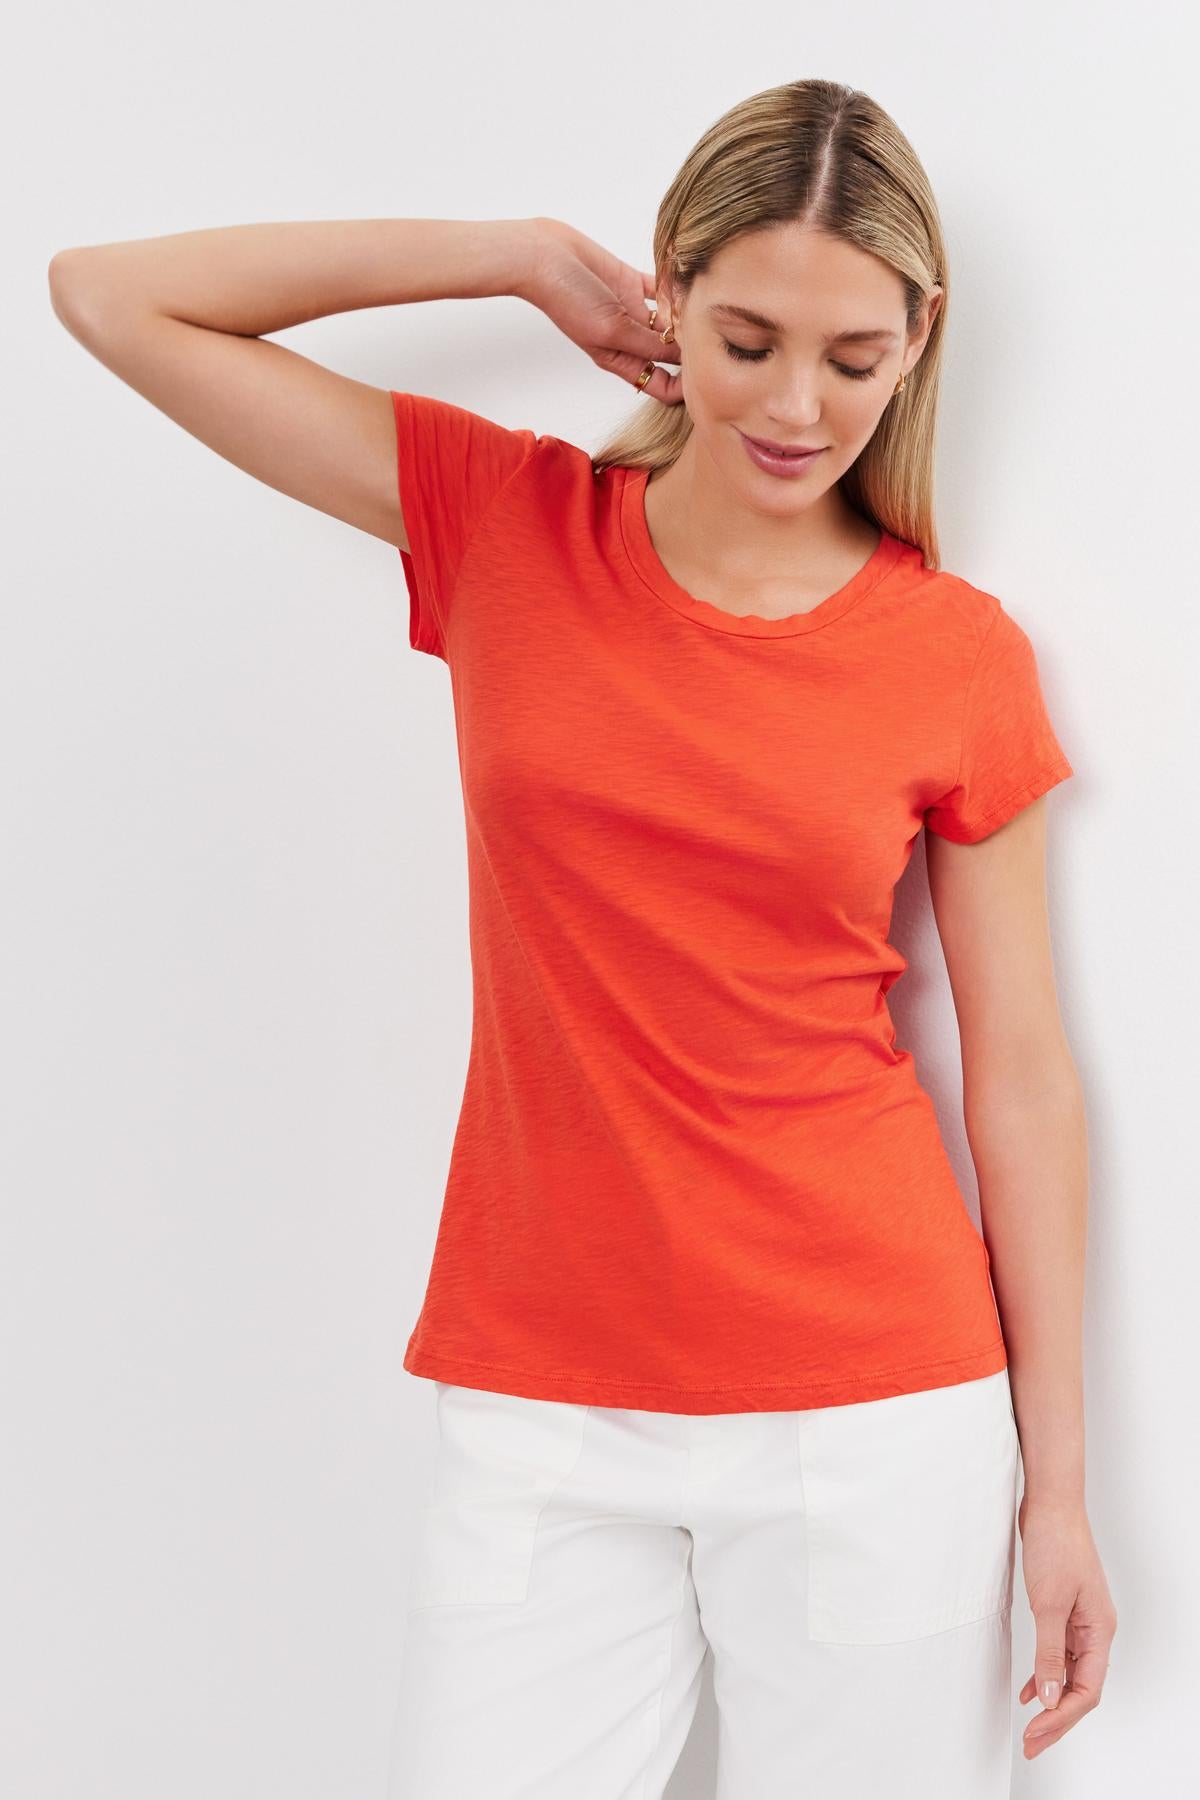   A young woman wearing a bright orange Velvet by Graham & Spencer ODELIA COTTON SLUB CREW NECK TEE and white pants, posing with her hand on her neck against a white background. 